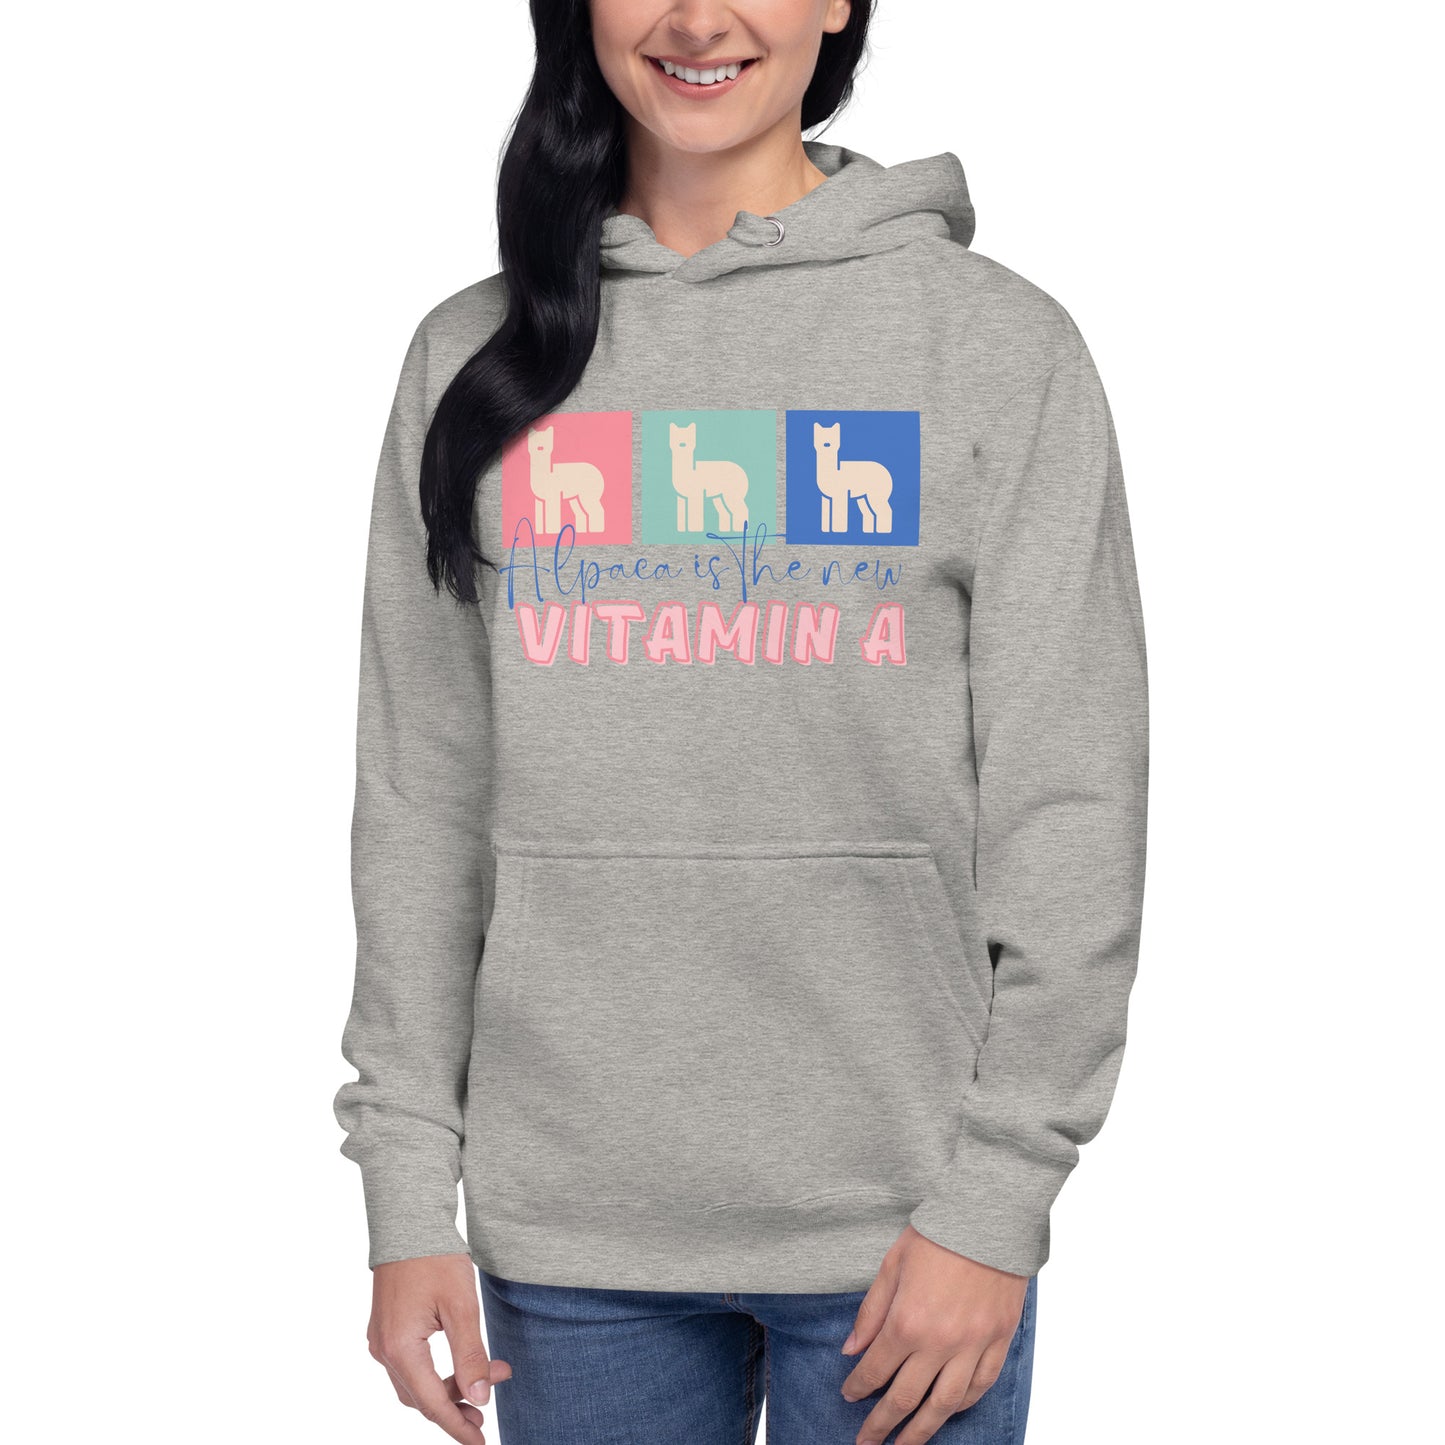 Alpaca Is The New Vitamin A 100% Cotton Face Unisex Hoodie